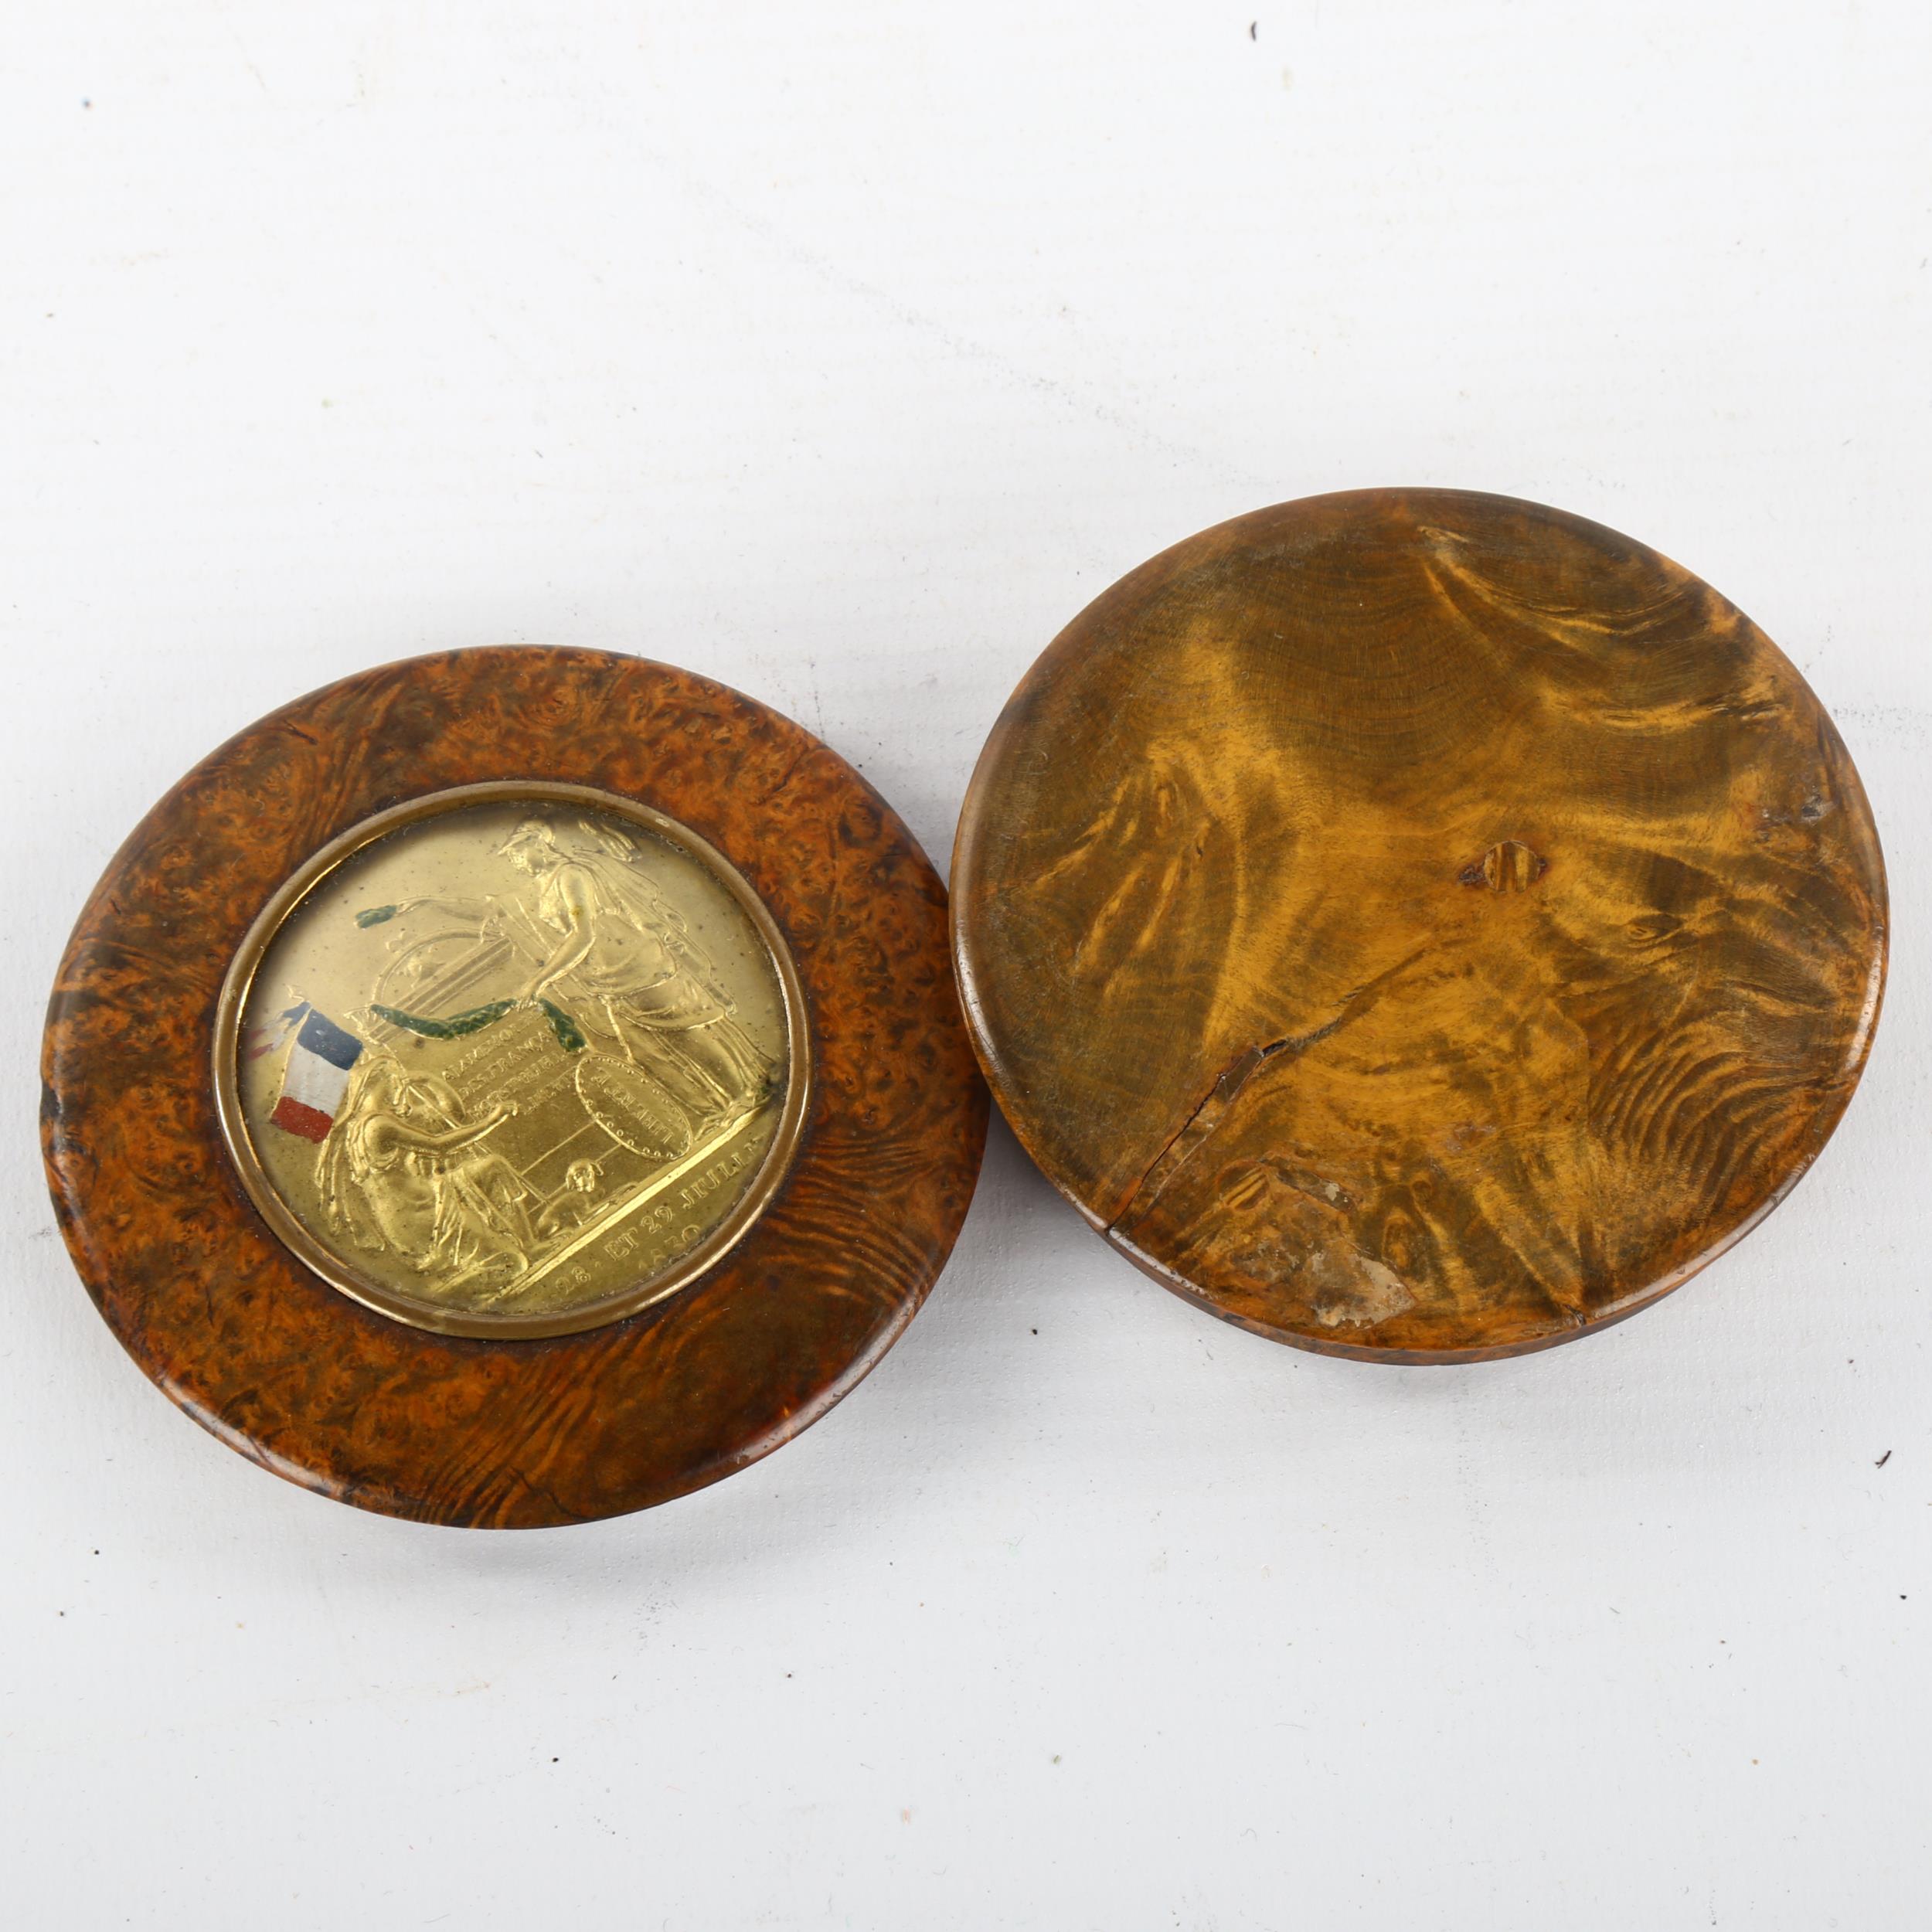 A 19th century French circular burr-walnut box, the lid having an inset medallion commemorating - Image 3 of 3